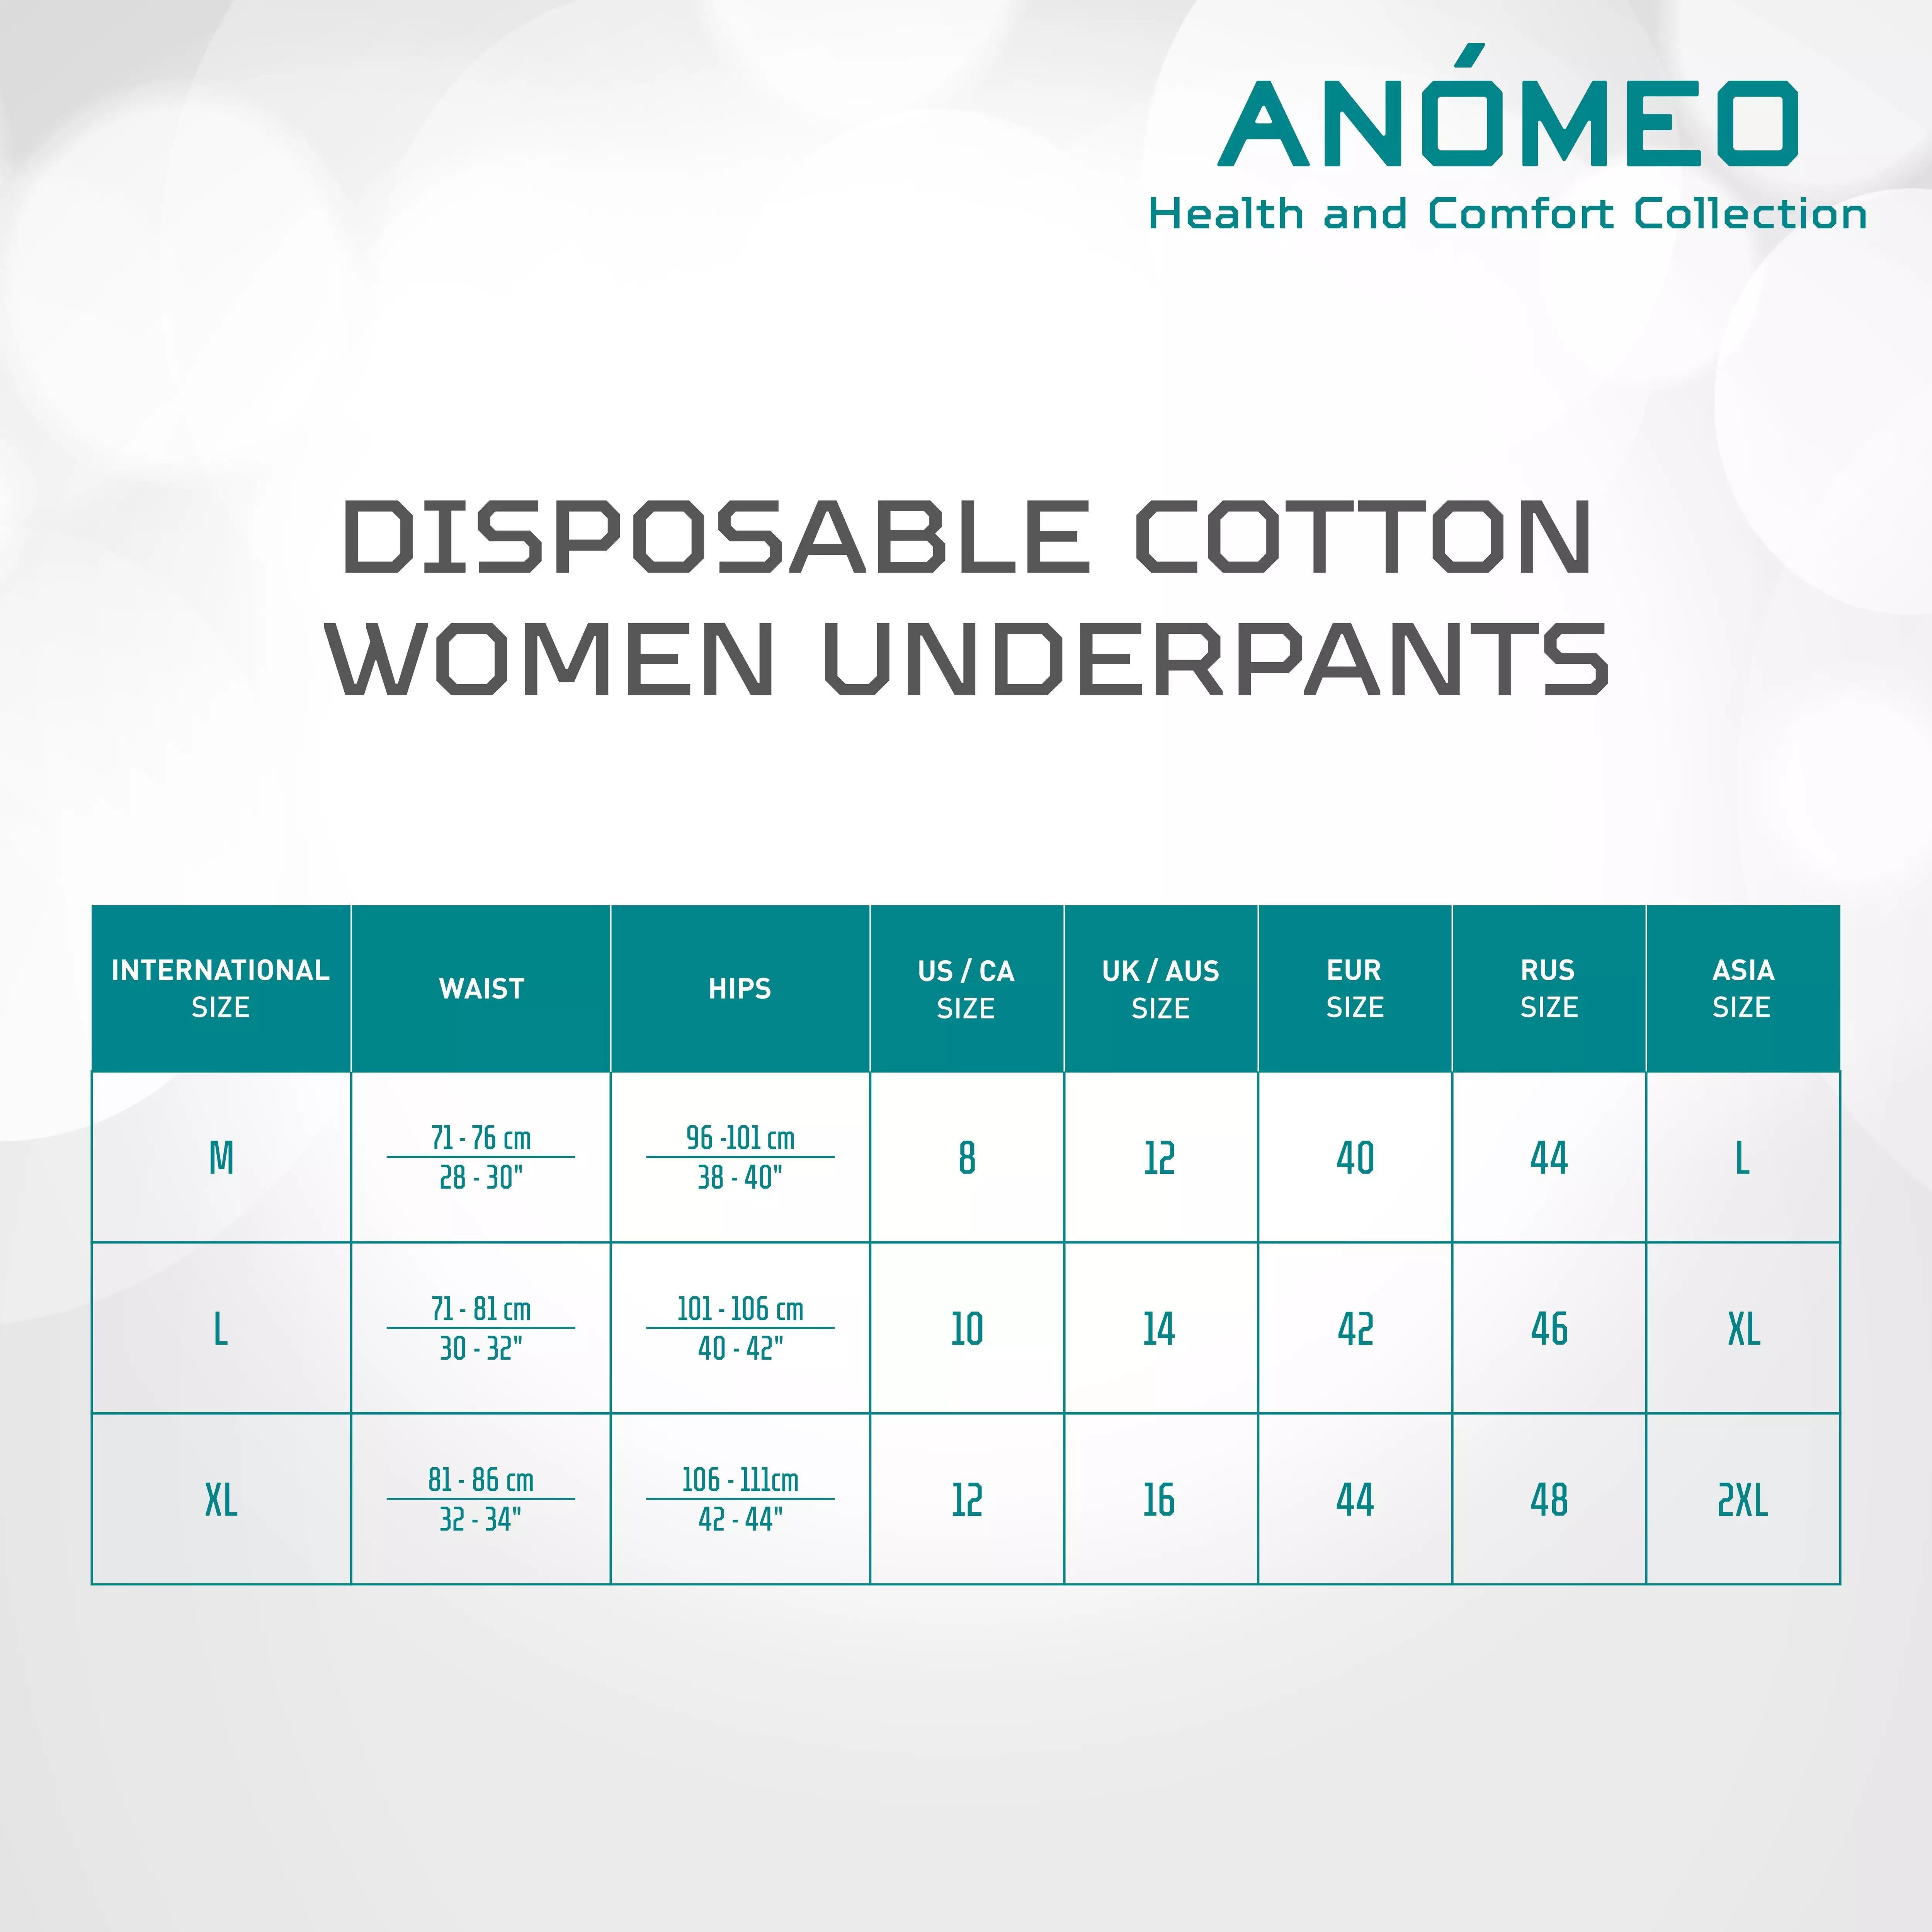 Anomeo High Quality Disposable Underpants / Underwear for Women - 100%  Cotton, 5 pcs in 1 pack (Available in M, L, XL sizes)